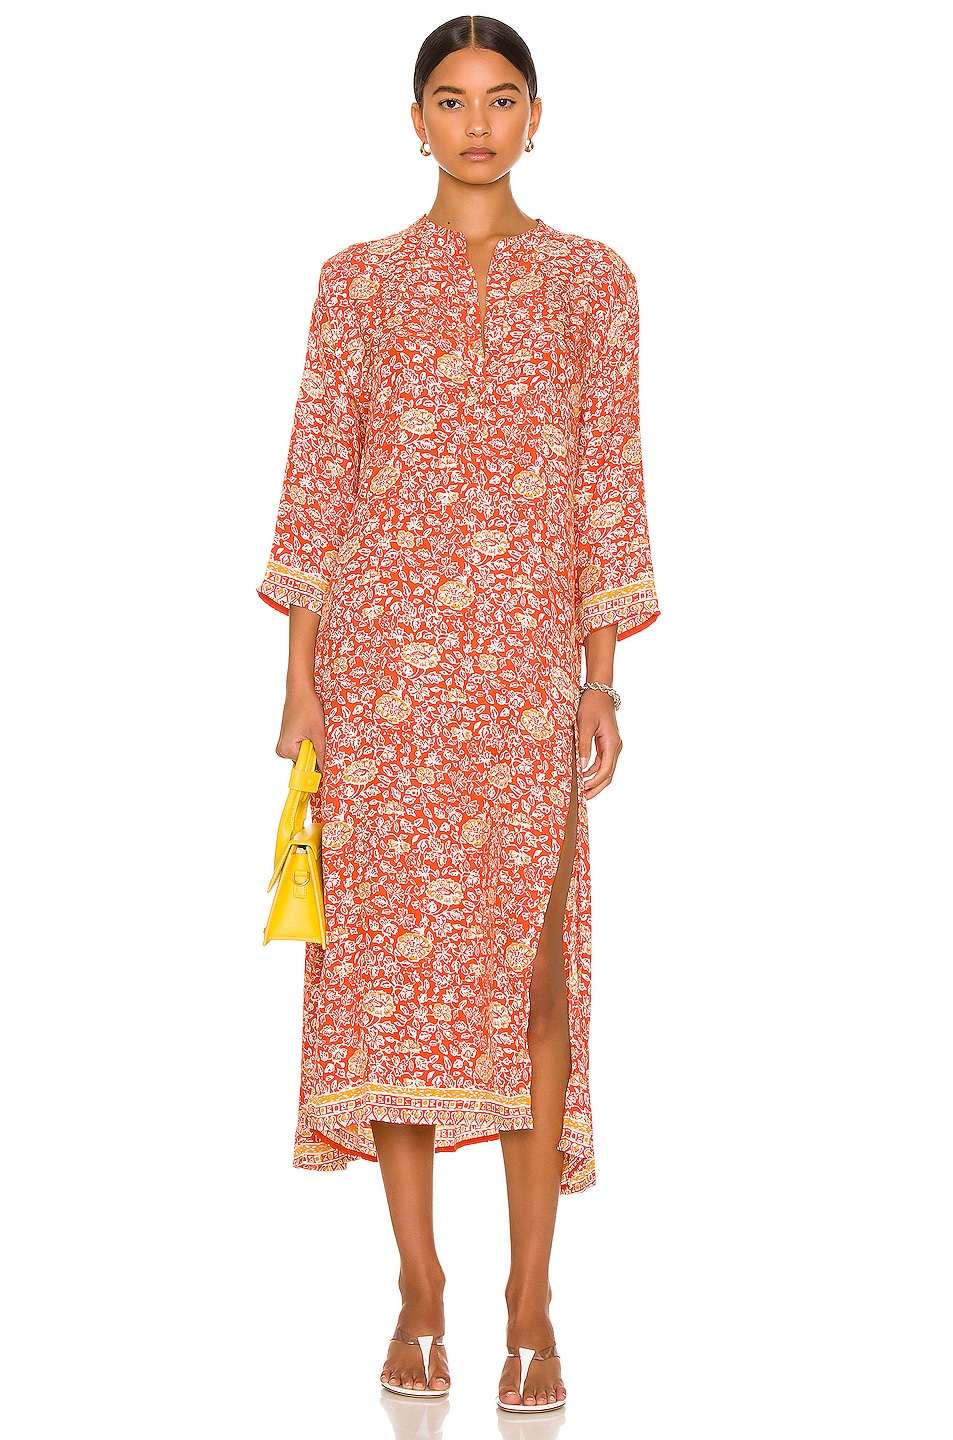 Image 1 of Natalie Martin Isobel Dress in Floral Print Tuscany Sun